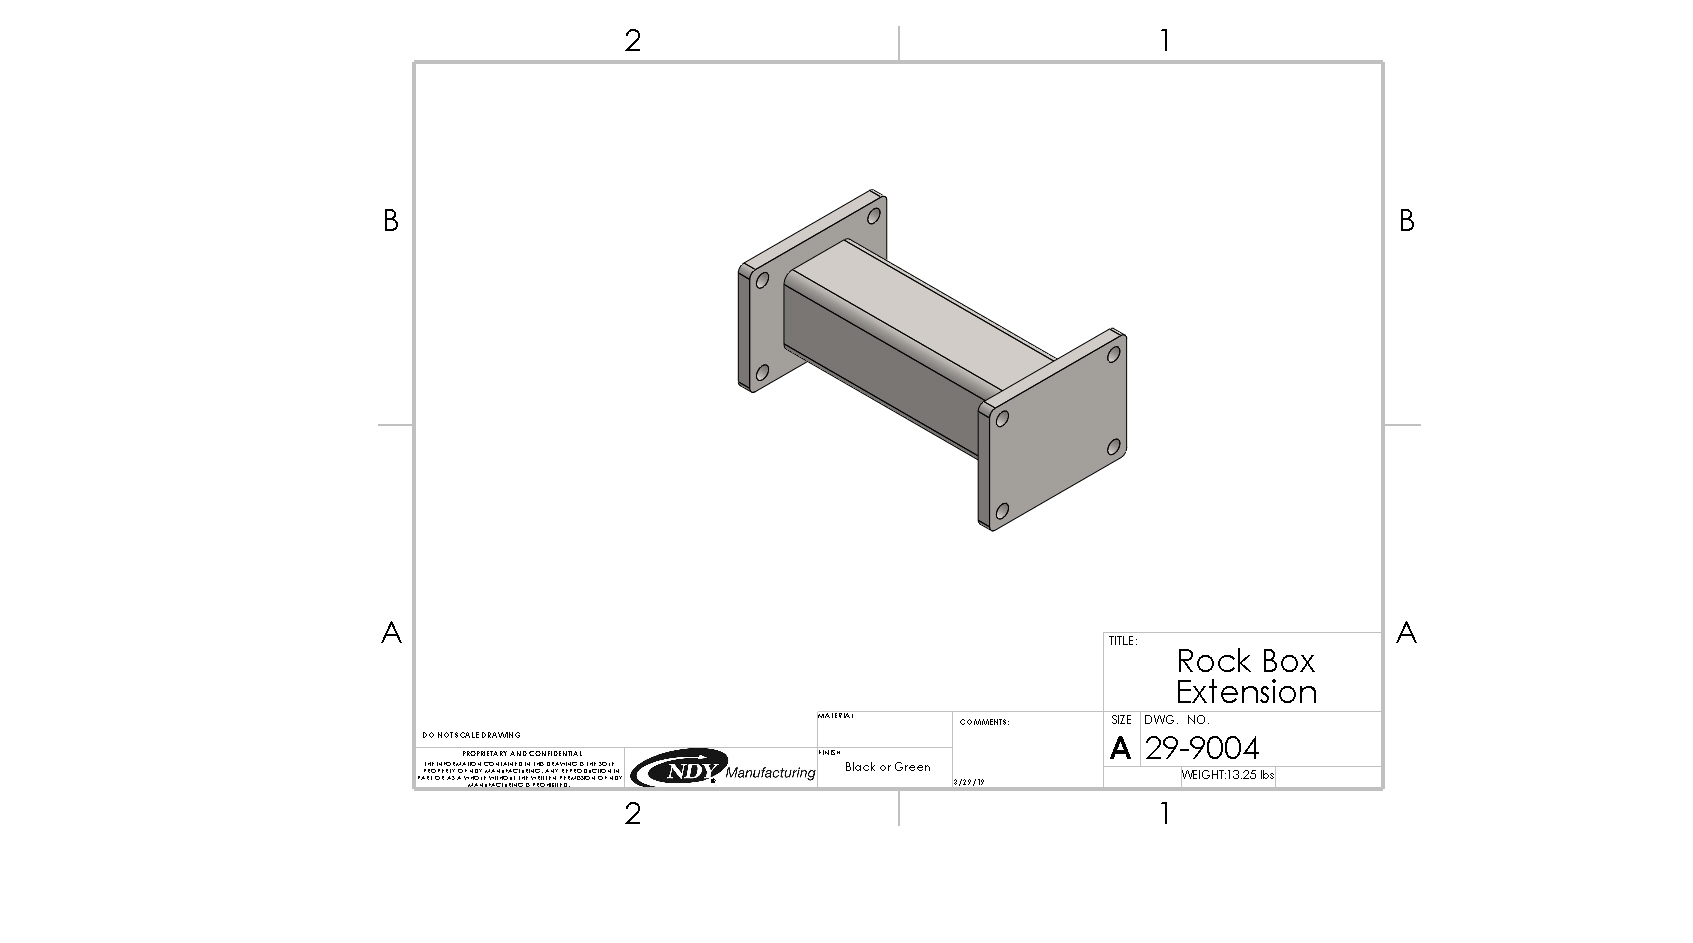 A drawing of a Rock Box Extension.